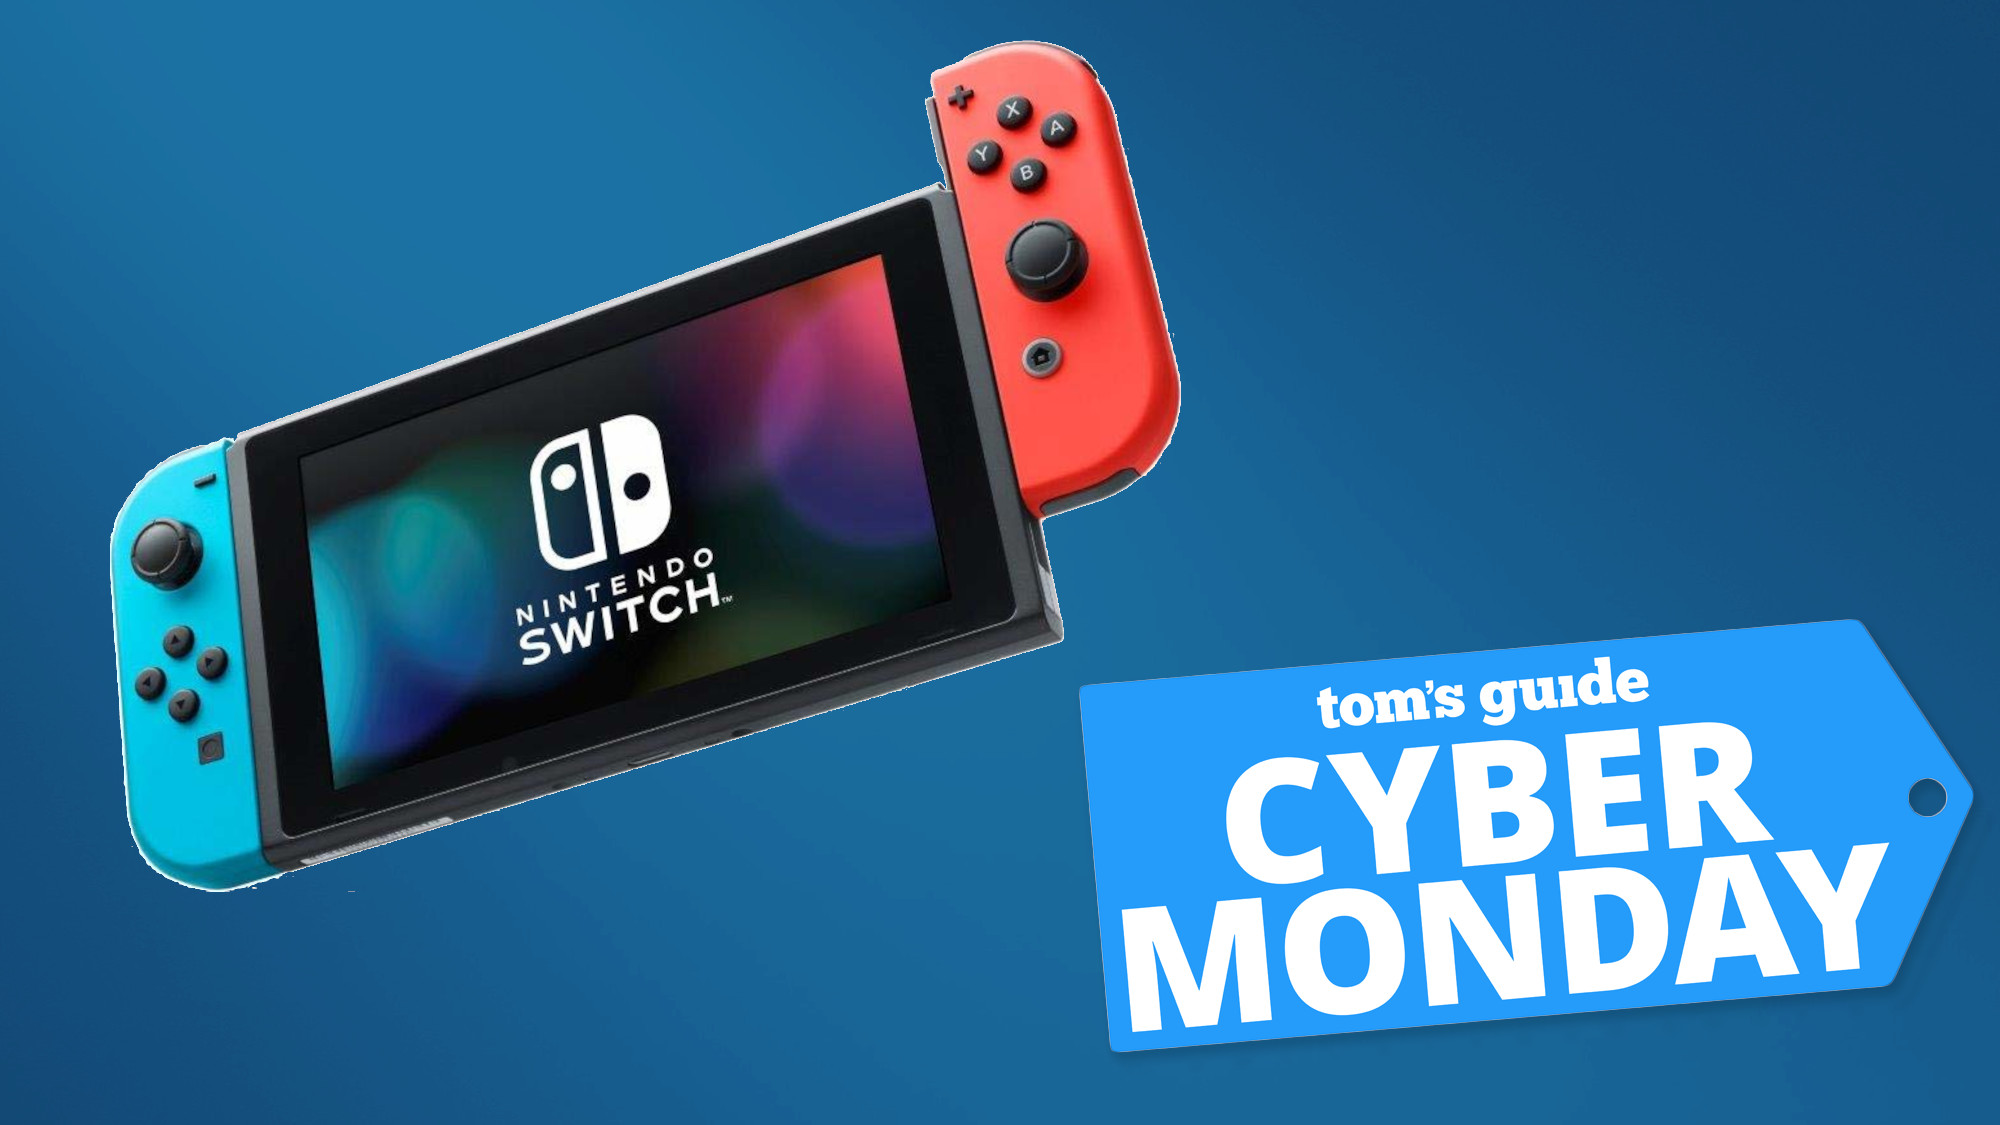 will the nintendo switch be on sale for cyber monday